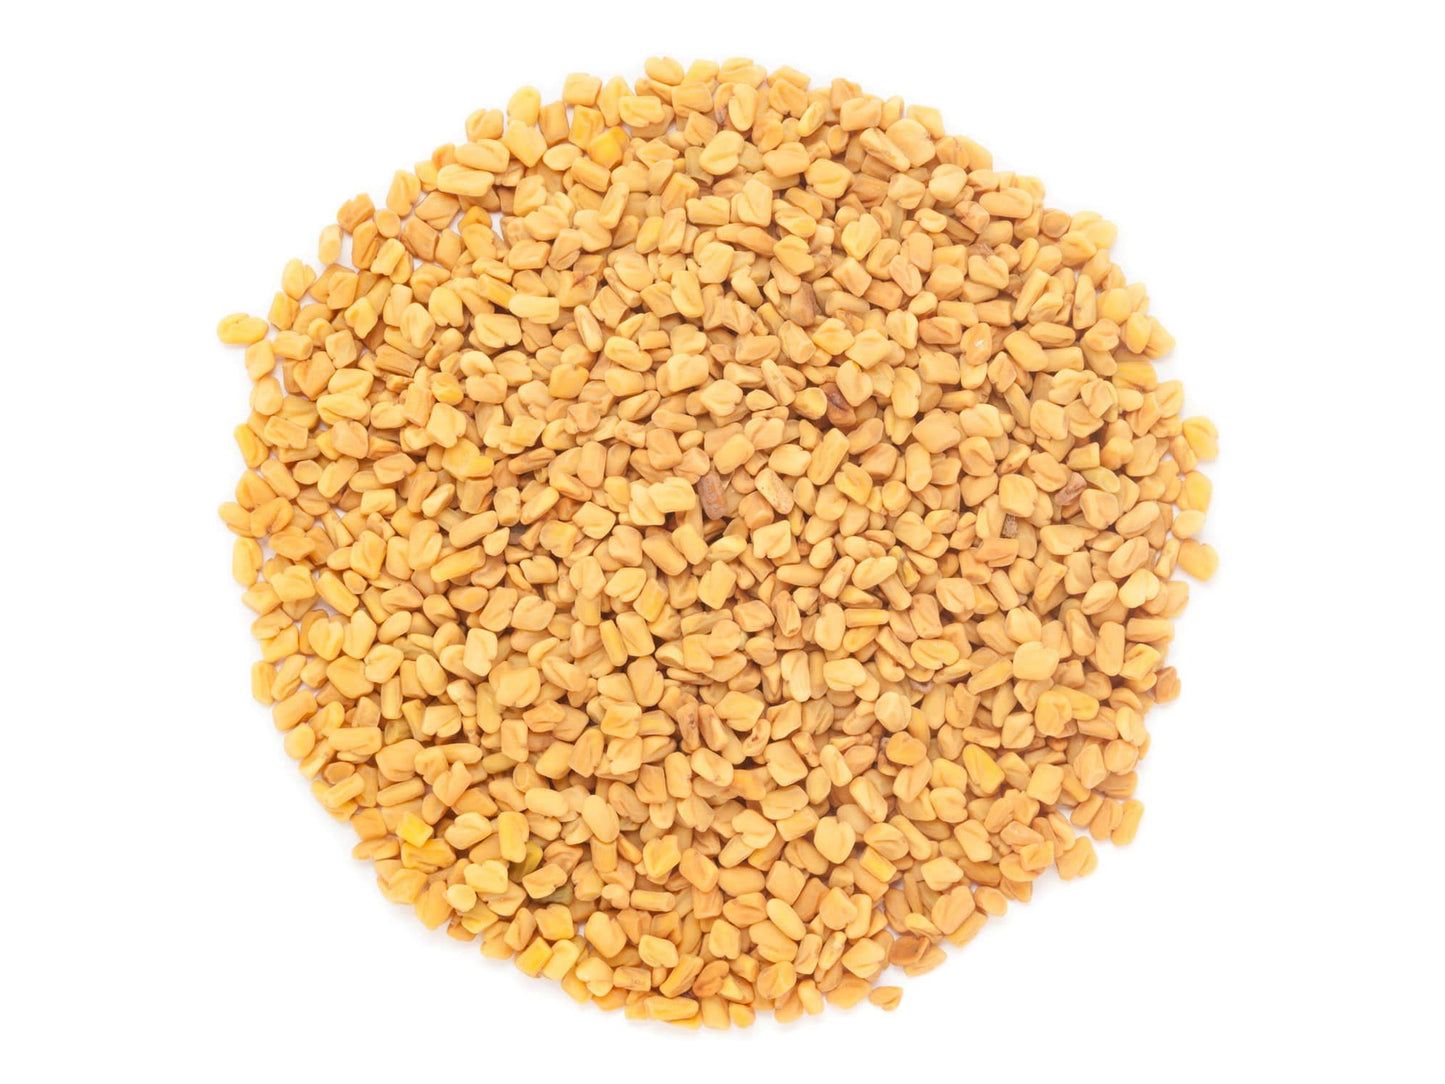 Organic Fenugreek Seeds — Non-GMO, Raw, Whole Methi, Kosher, Vegan, Bulk, Rich in Iron, Copper and Fiber - by Food to Live